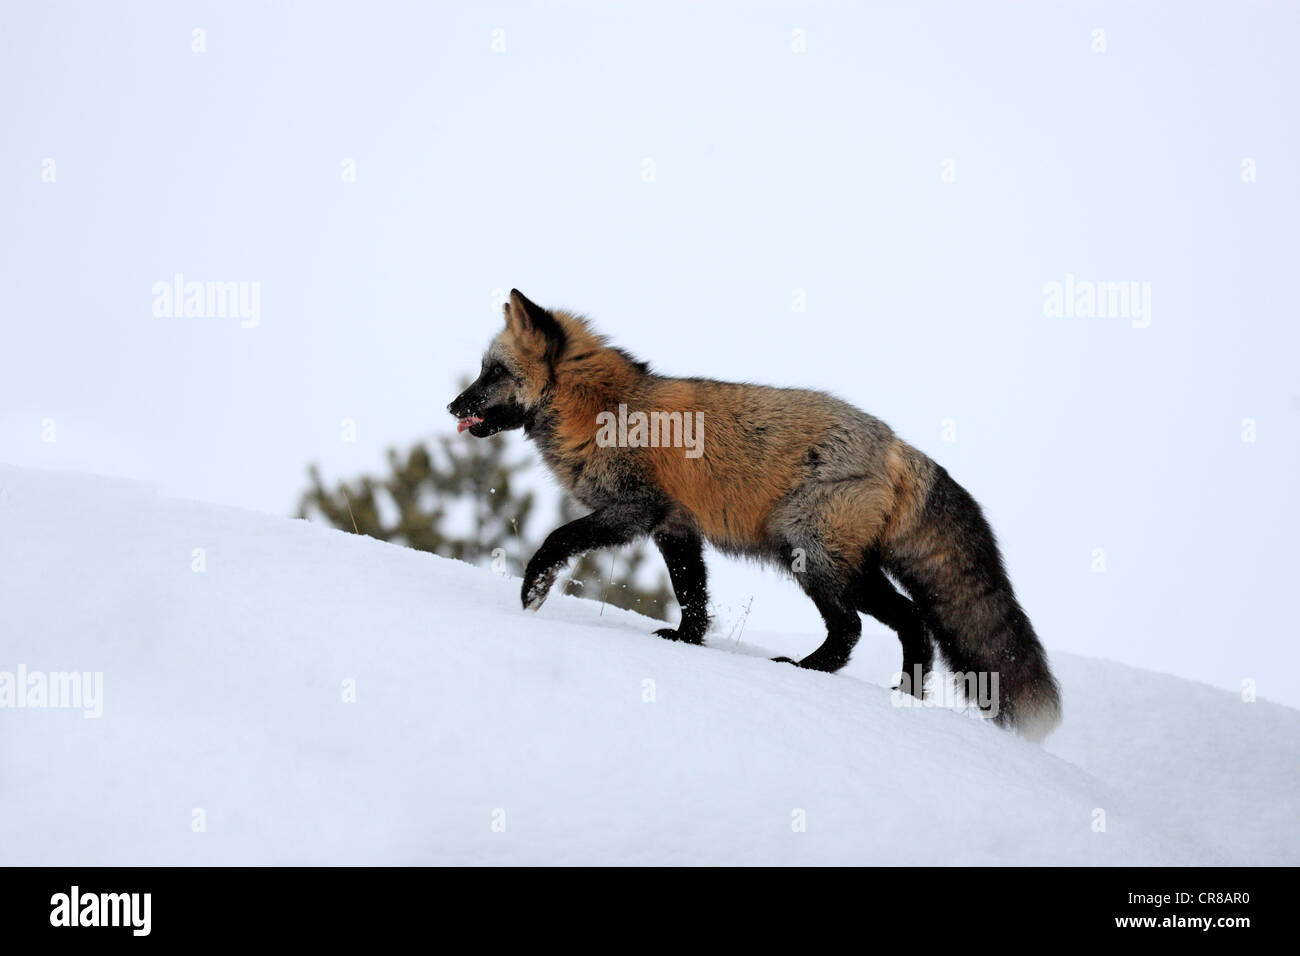 North American Red Fox (Vulpes vulpes), adult, foraging in the snow, winter, Montana, USA Stock Photo